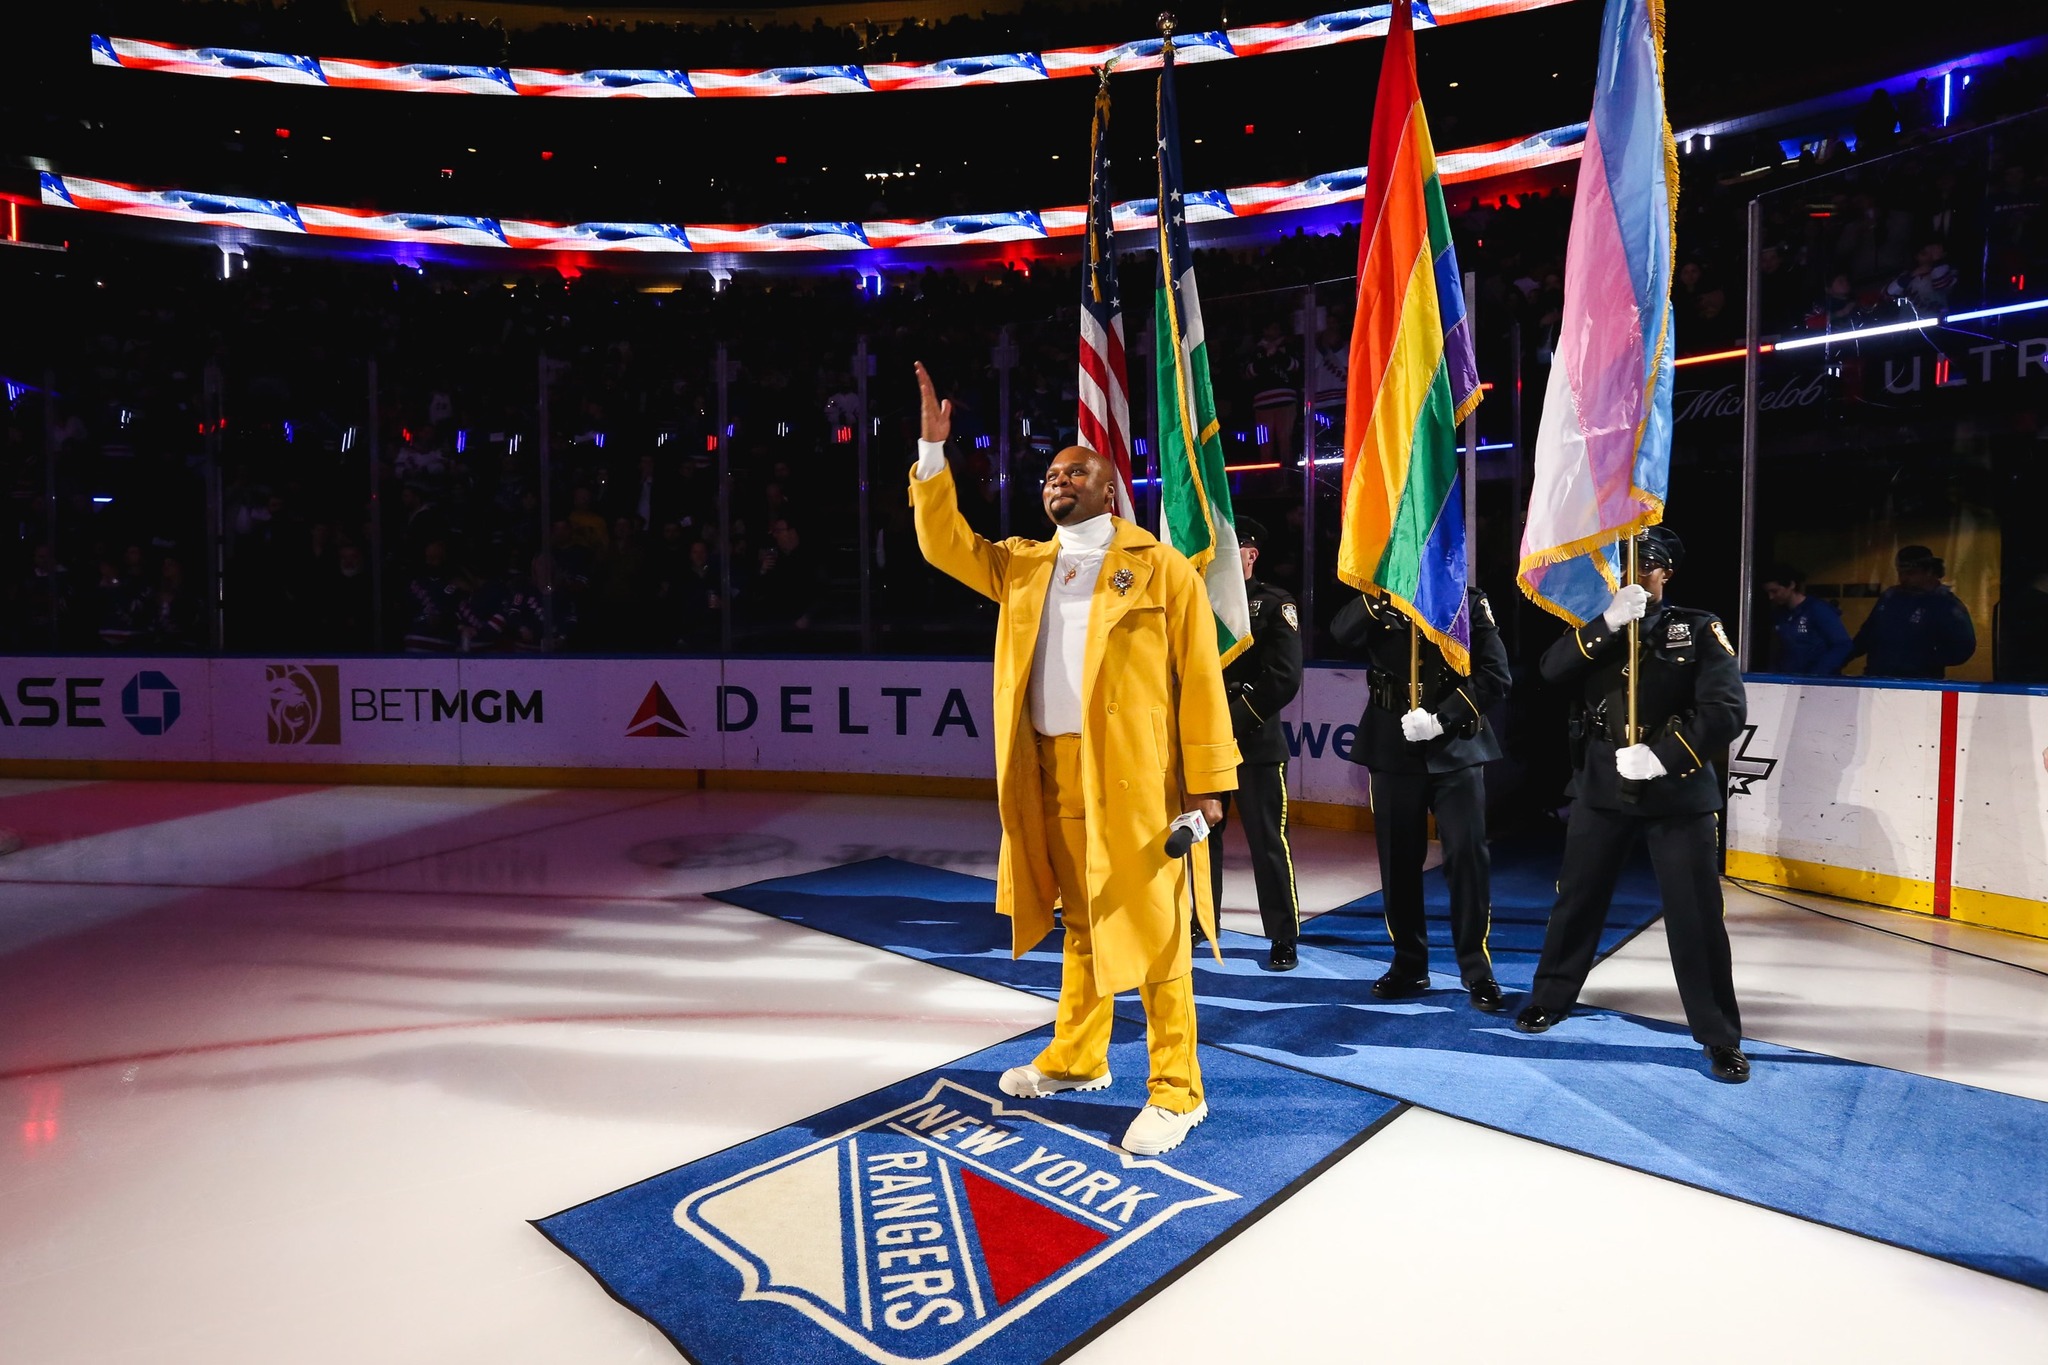 NY Rangers forgoes Pride jerseys & stick tape for team Pride night